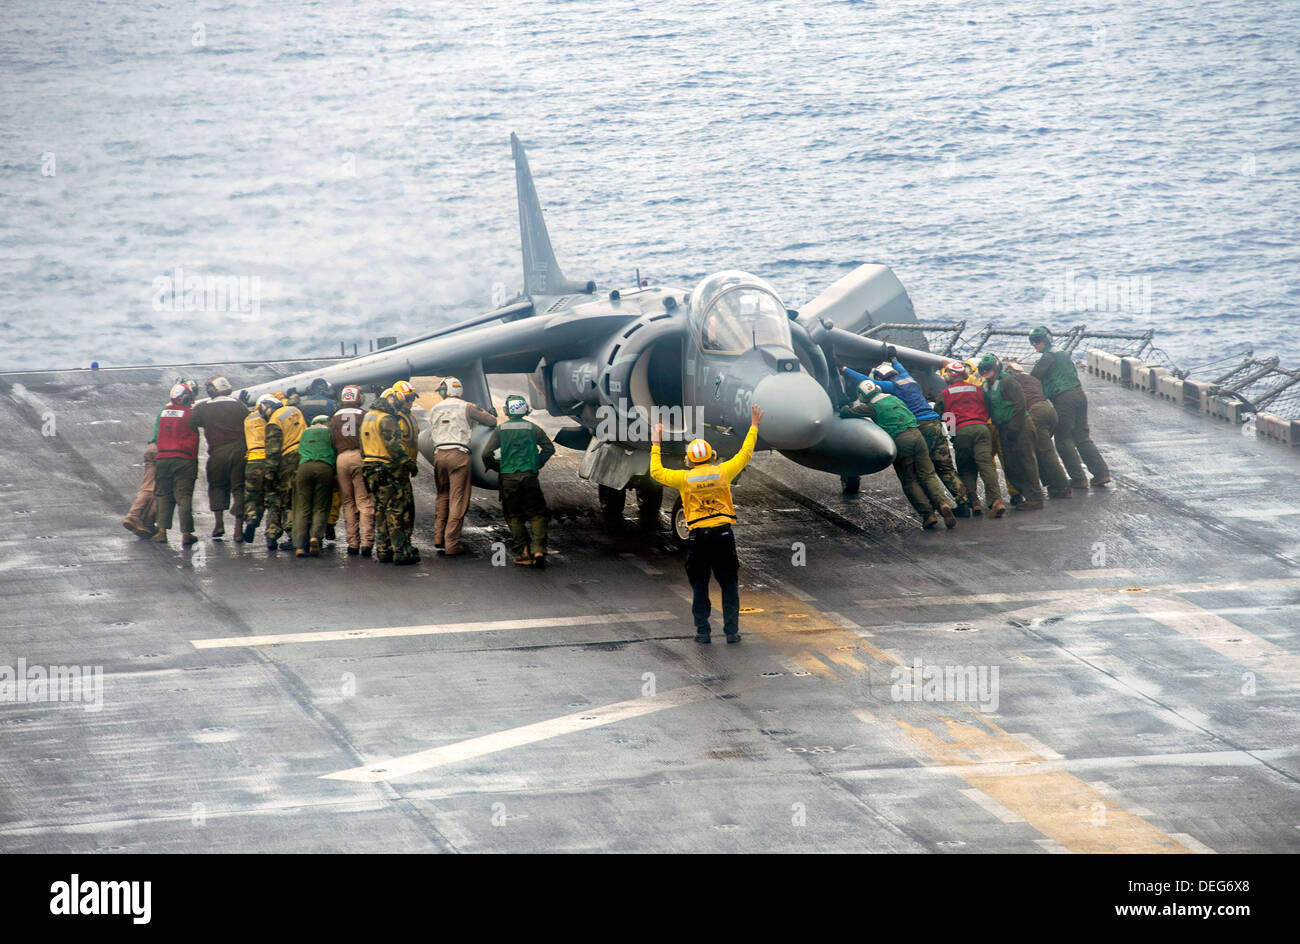 US Sailors and Marines move a Marine Corps AV-8B Harrier II aircraft during a rain storm on the flight deck of the amphibious assault ship USS Boxer September 11, 2013 underway in the Pacific Ocean Sept. 11, 2013. The Boxer was underway in the U.S. 7th Fleet area of responsibility supporting maritime security operations and theater security cooperation efforts. Stock Photo